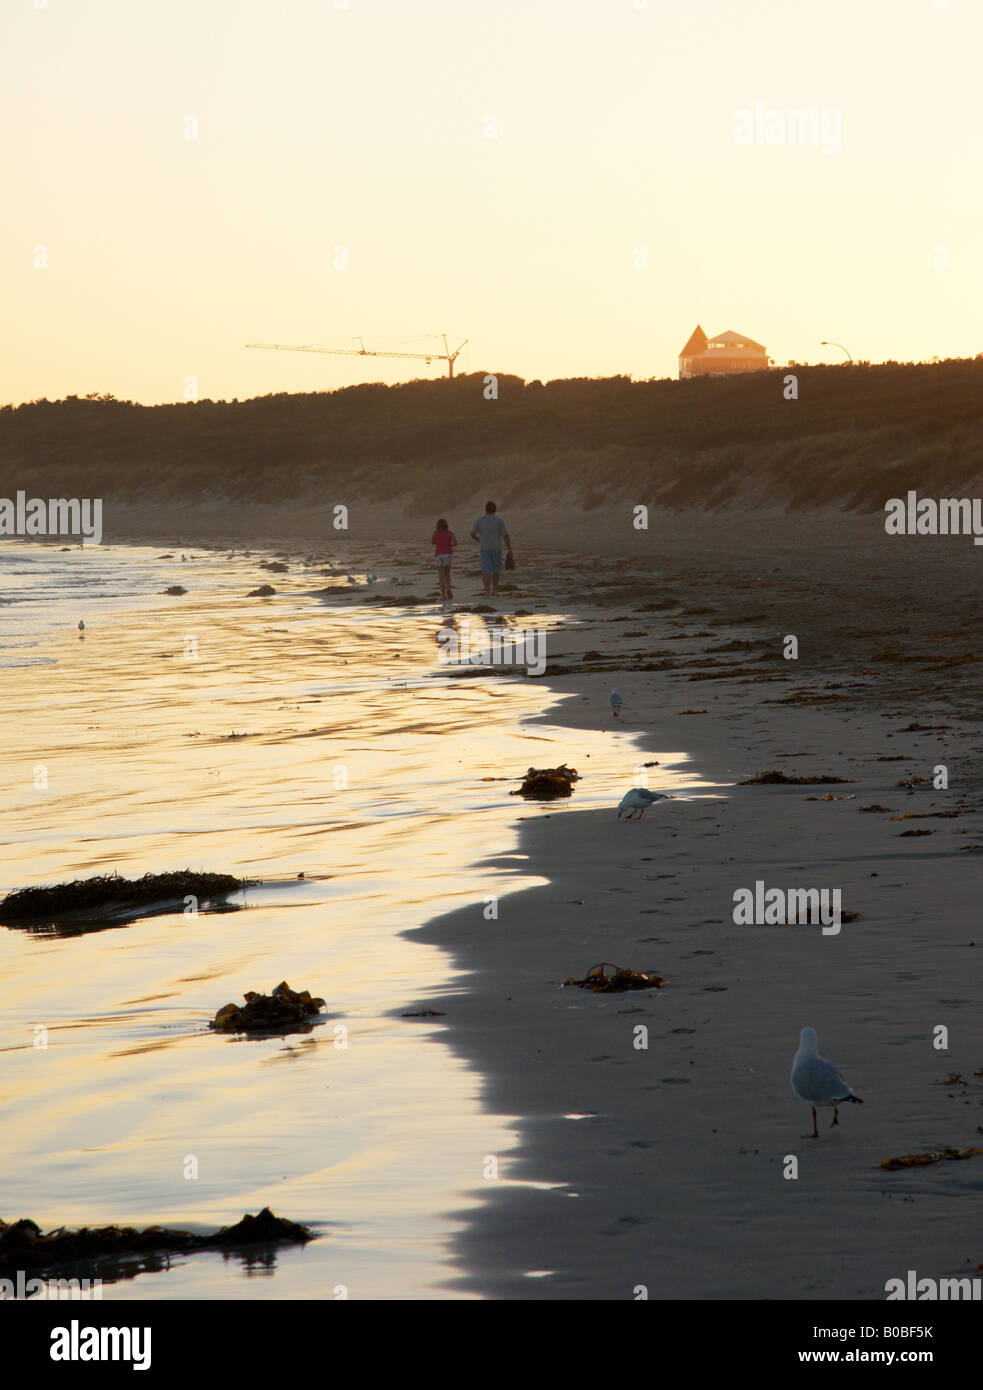 Father and daughter walking along a beach in the setting sun. Stock Photo